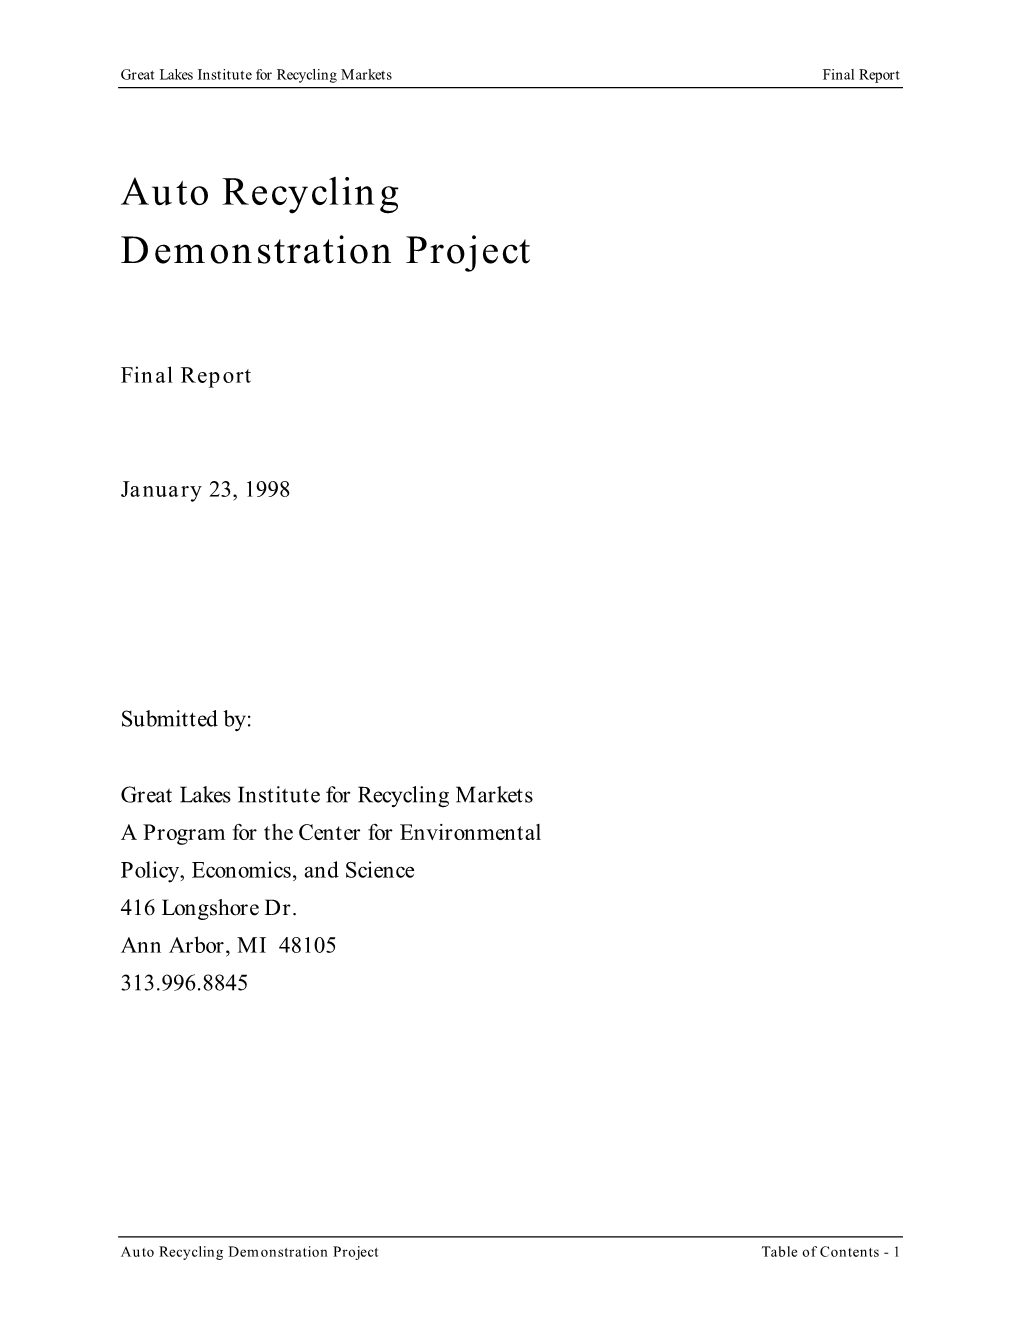 Auto Recycling Demonstration Project Final Report